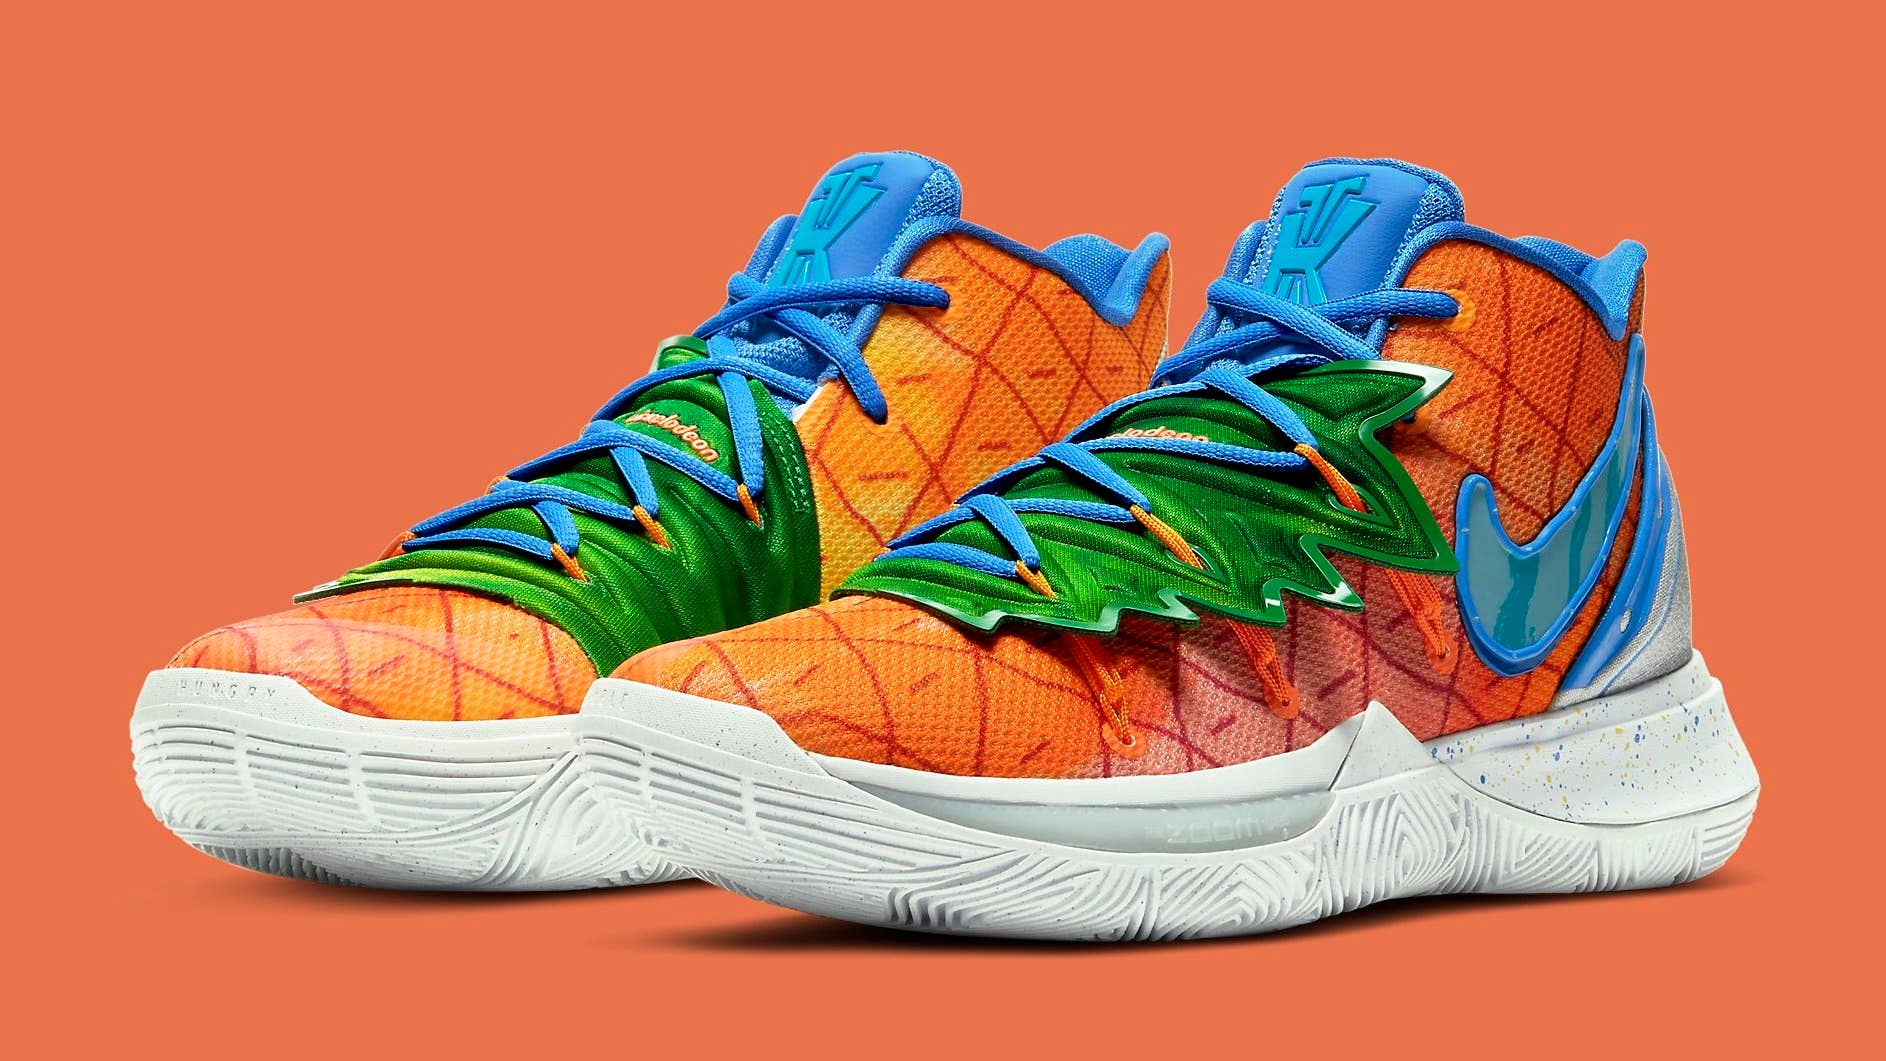 commando Wauw drie Pinapple House' SpongeBob x Kyrie 5s Are for NBA Opening Night | Complex